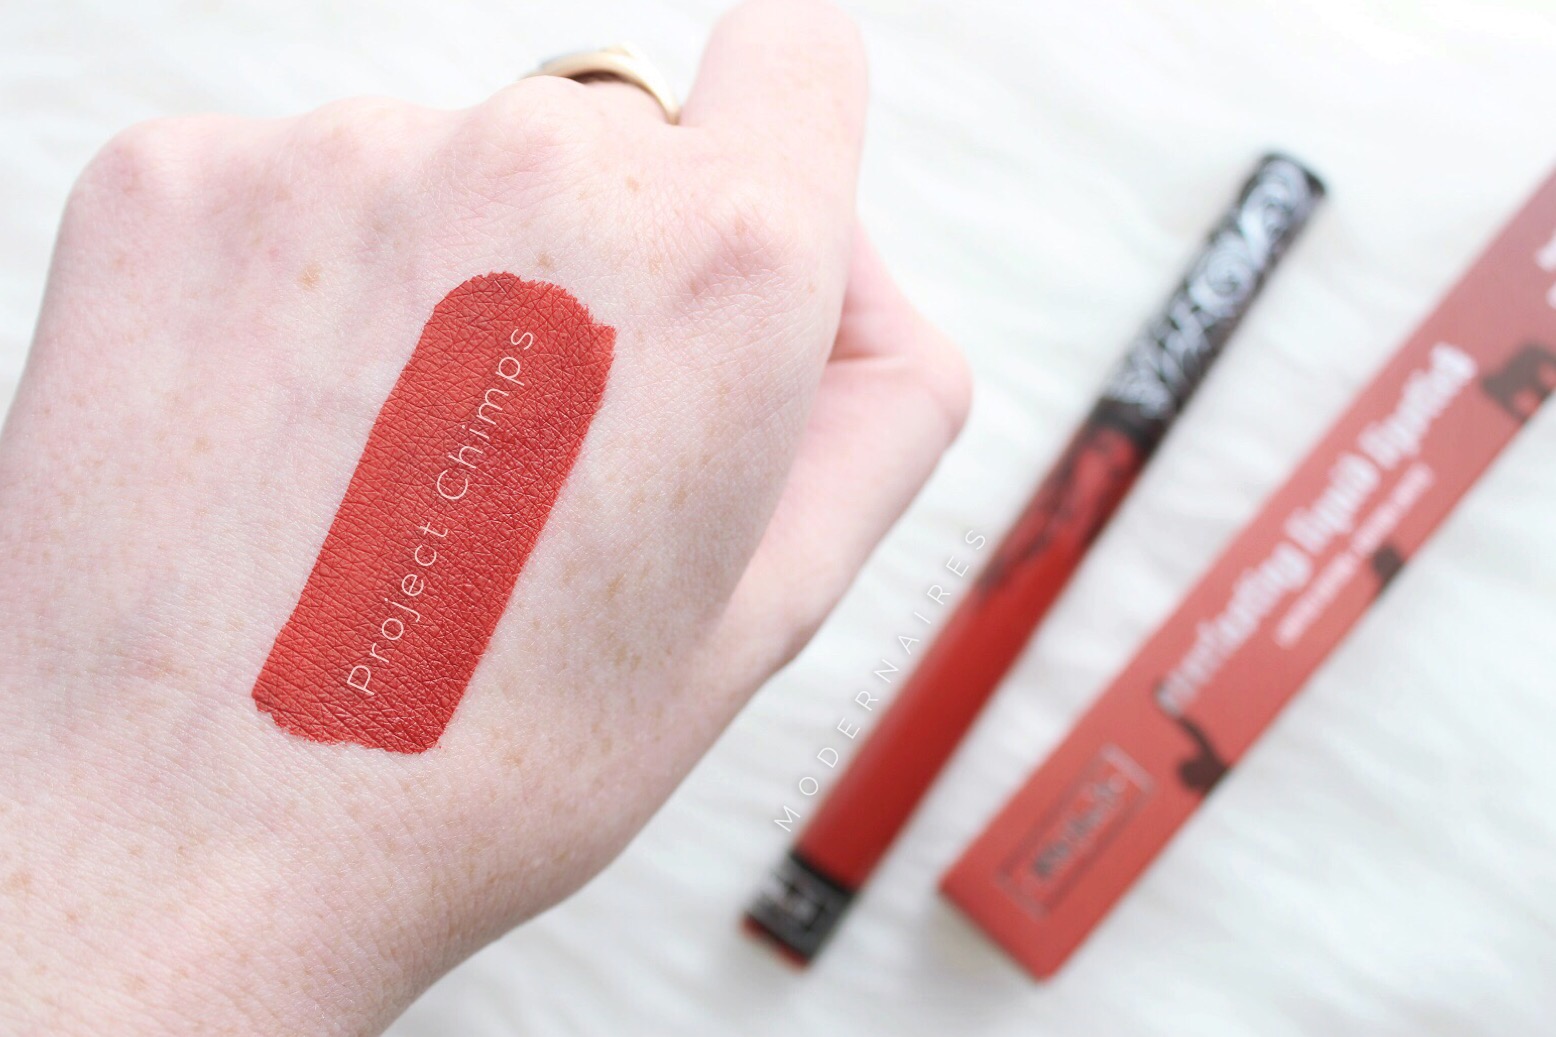 Swatches | KAT VON D Everlasting Liquid Lipstick in Project Chimps — Available Now! | Modernaires: Swatches | VON D Everlasting Liquid Lipstick in Project Chimps — Available Now!